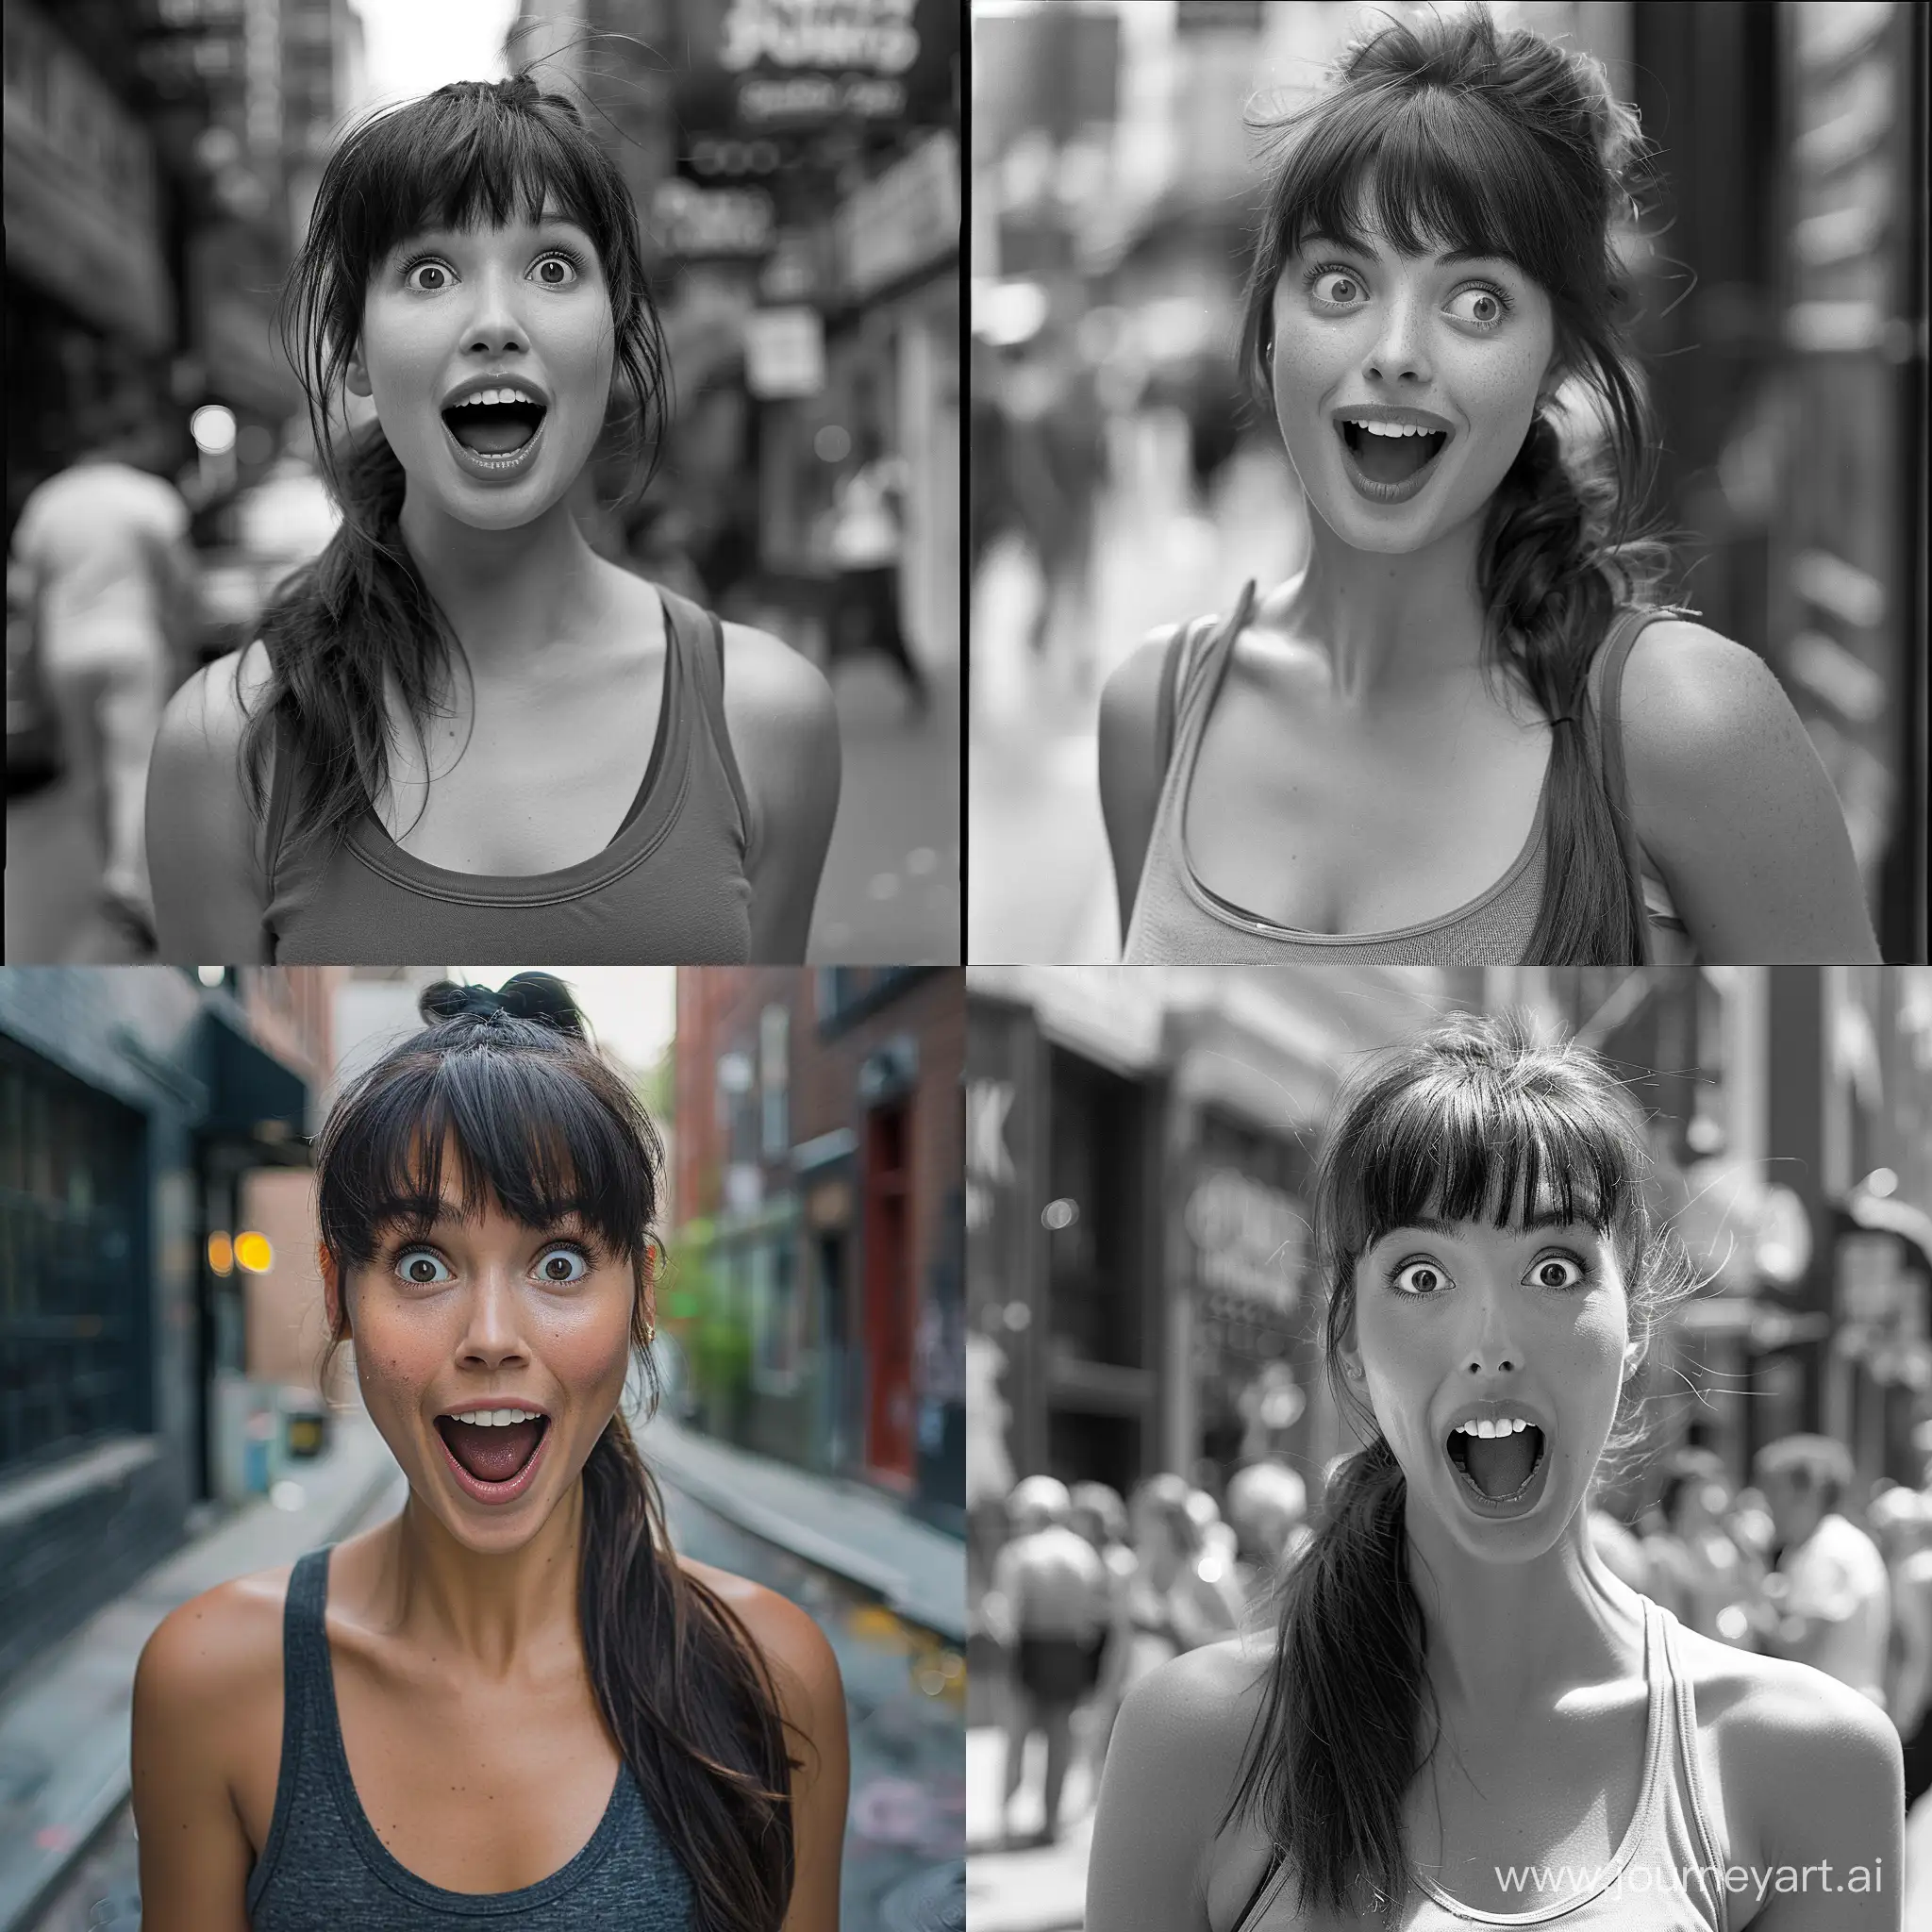 brunette woman, street candid, tanktop, lookinng surprised, 30 years old, big mouth, long neck, prominent cheekbones, wide eyes, shy, smiling, ponytail, protruding ears, bangs, Photography In the style of Annie Leibovitz